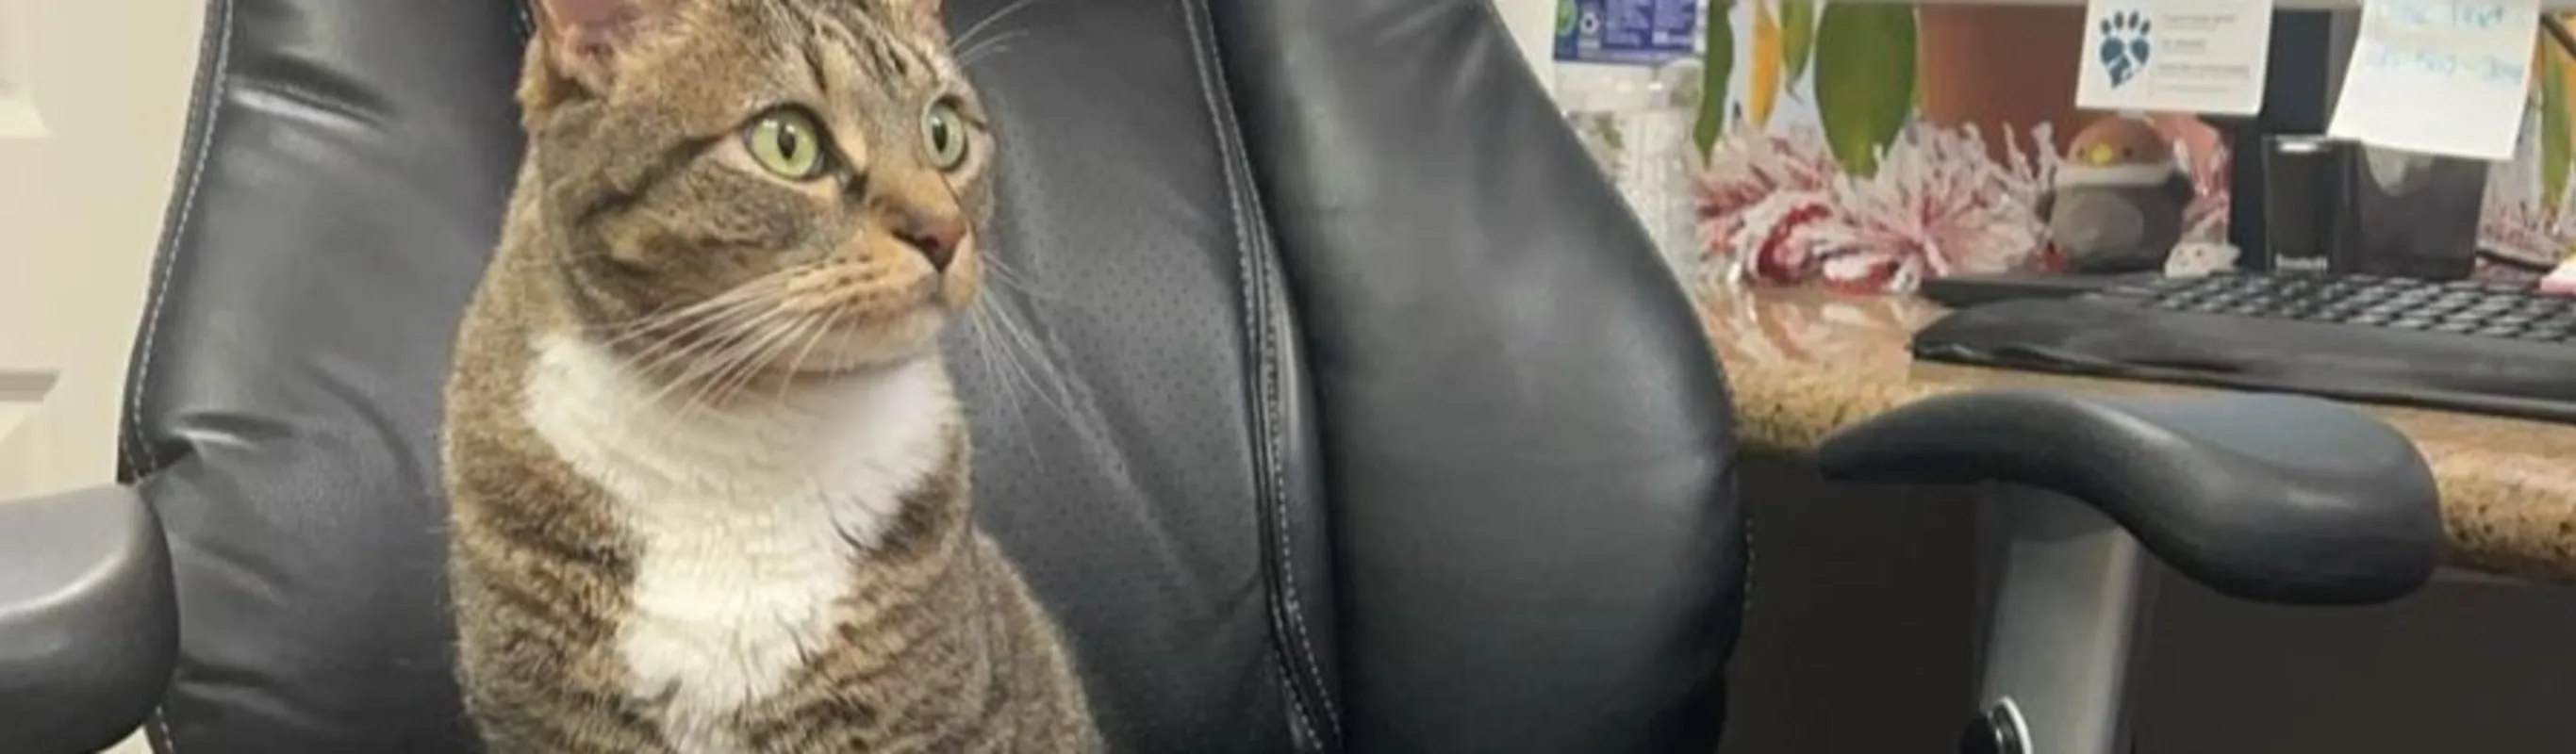 cat sitting in office chair